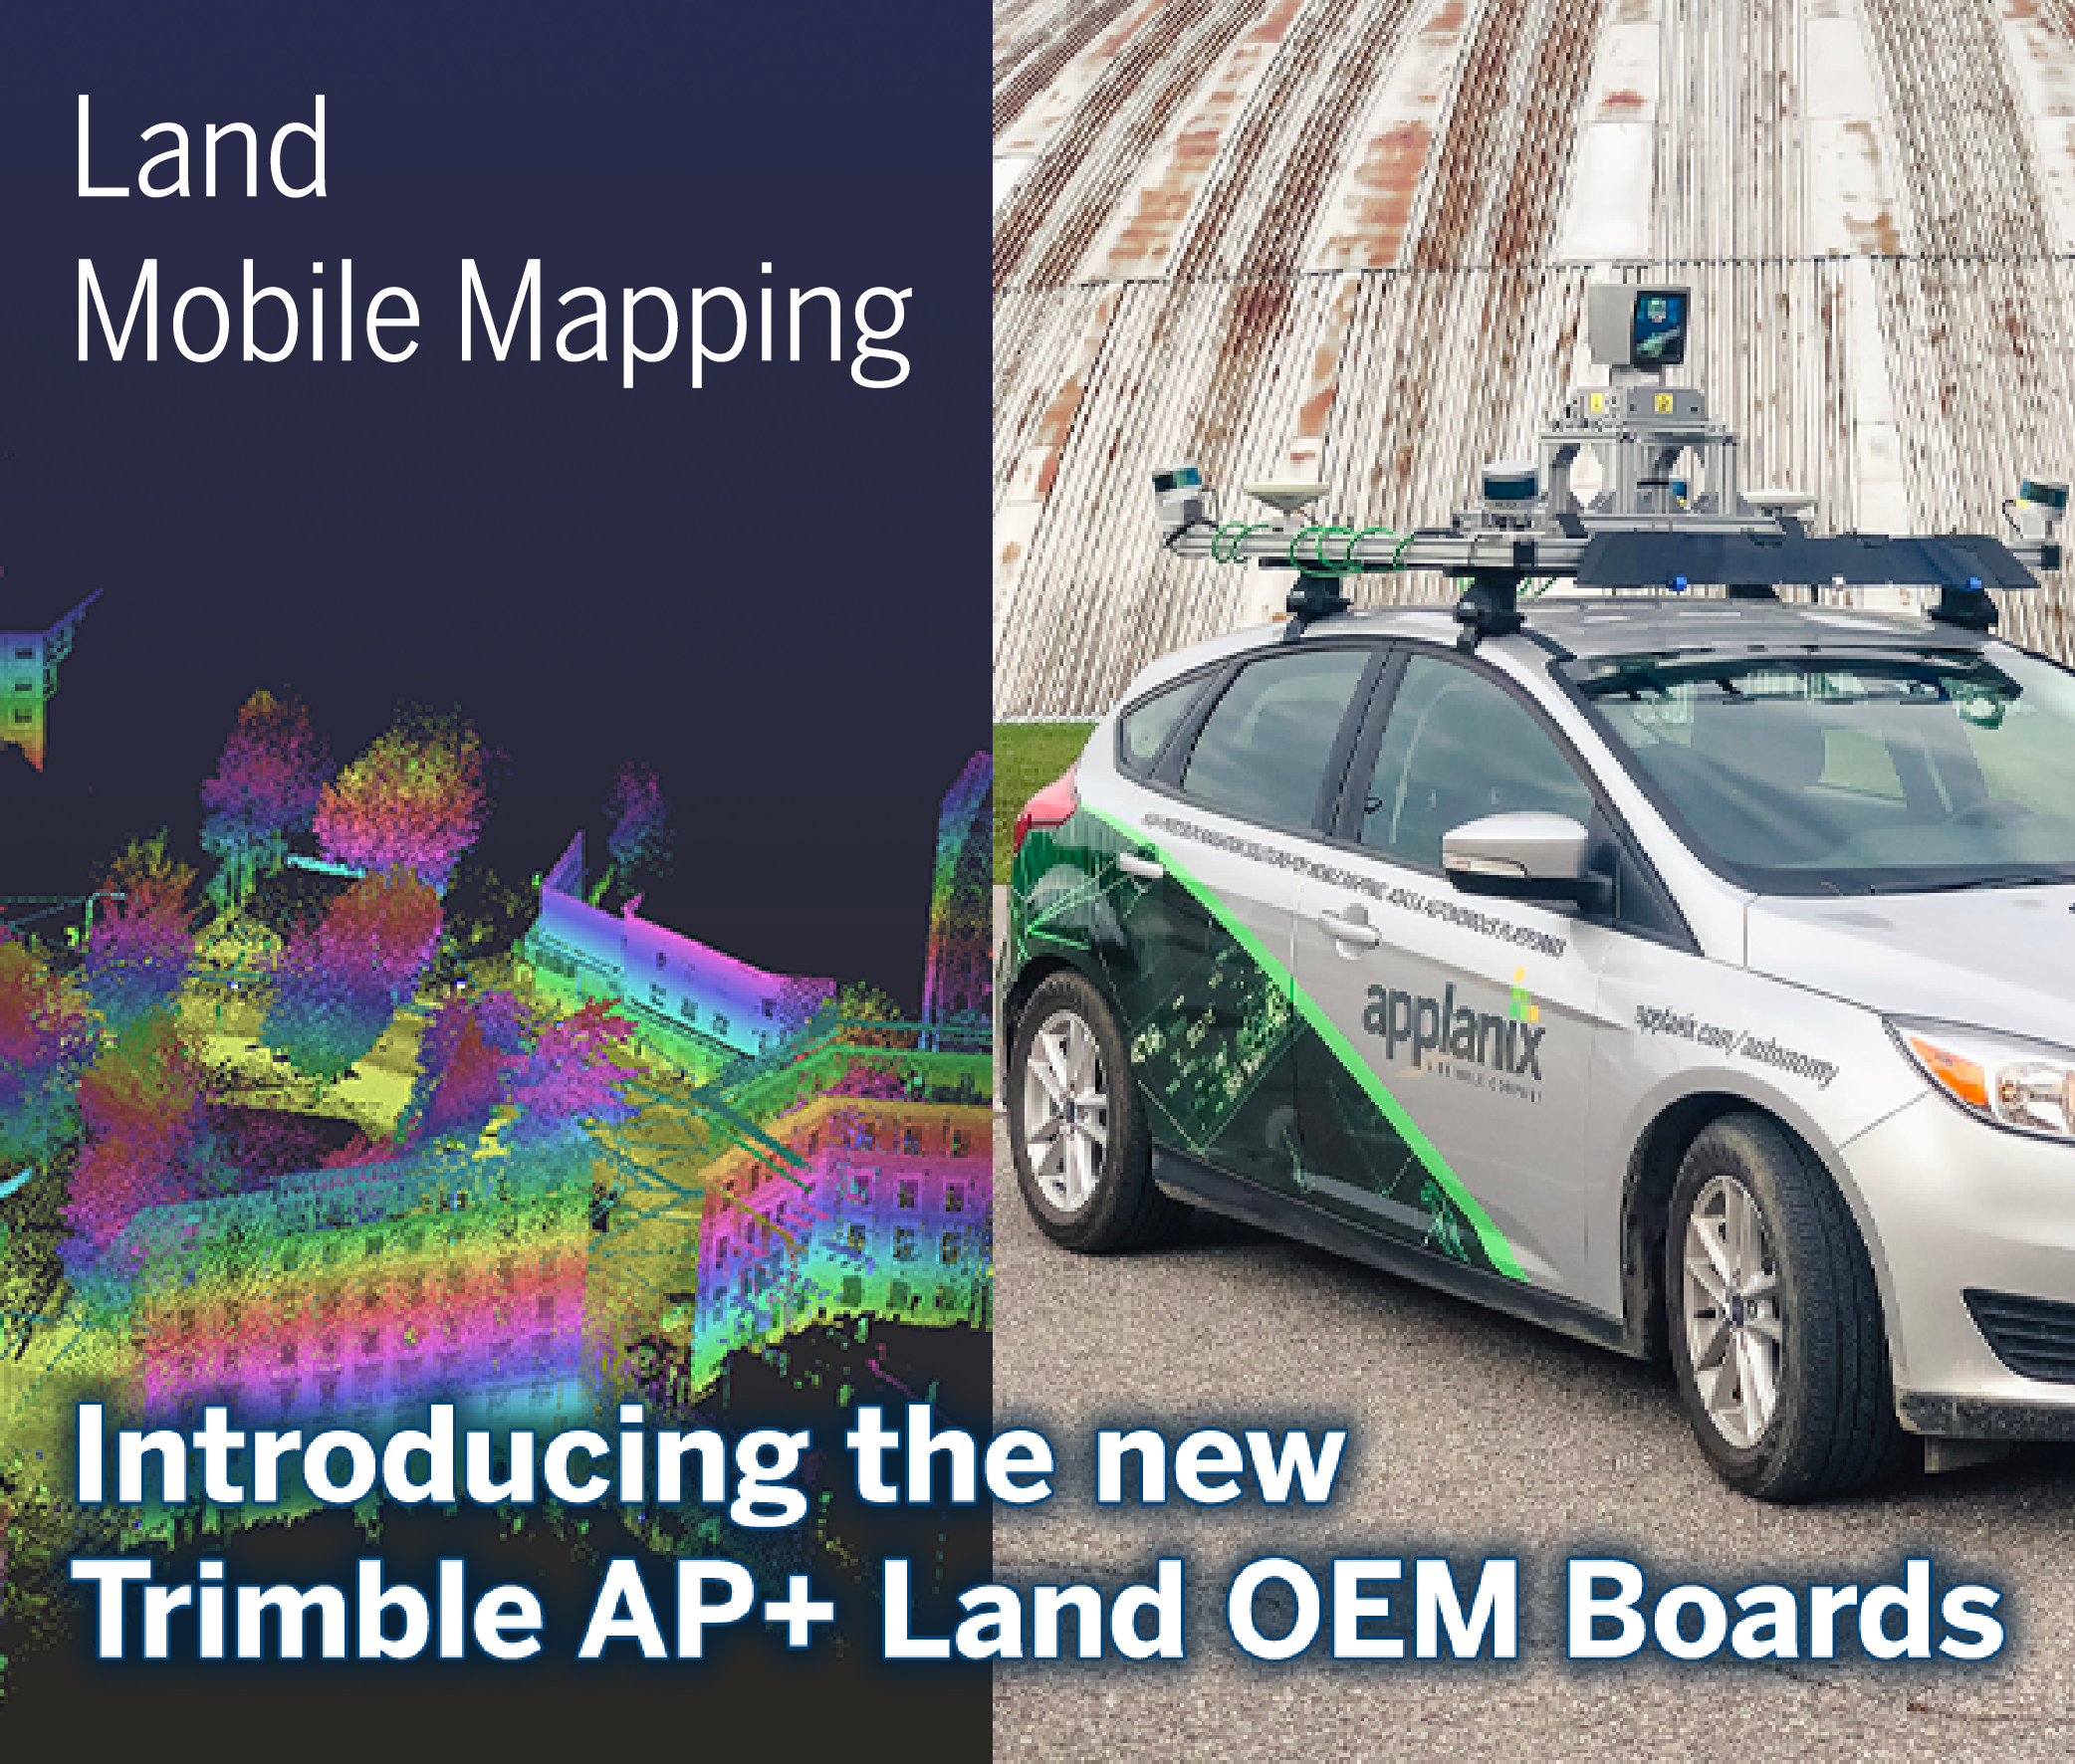 Applanix Introduces Next-Generation OEM Solution for Mobile Mapping Applications Using GNSS-Inertial Technology